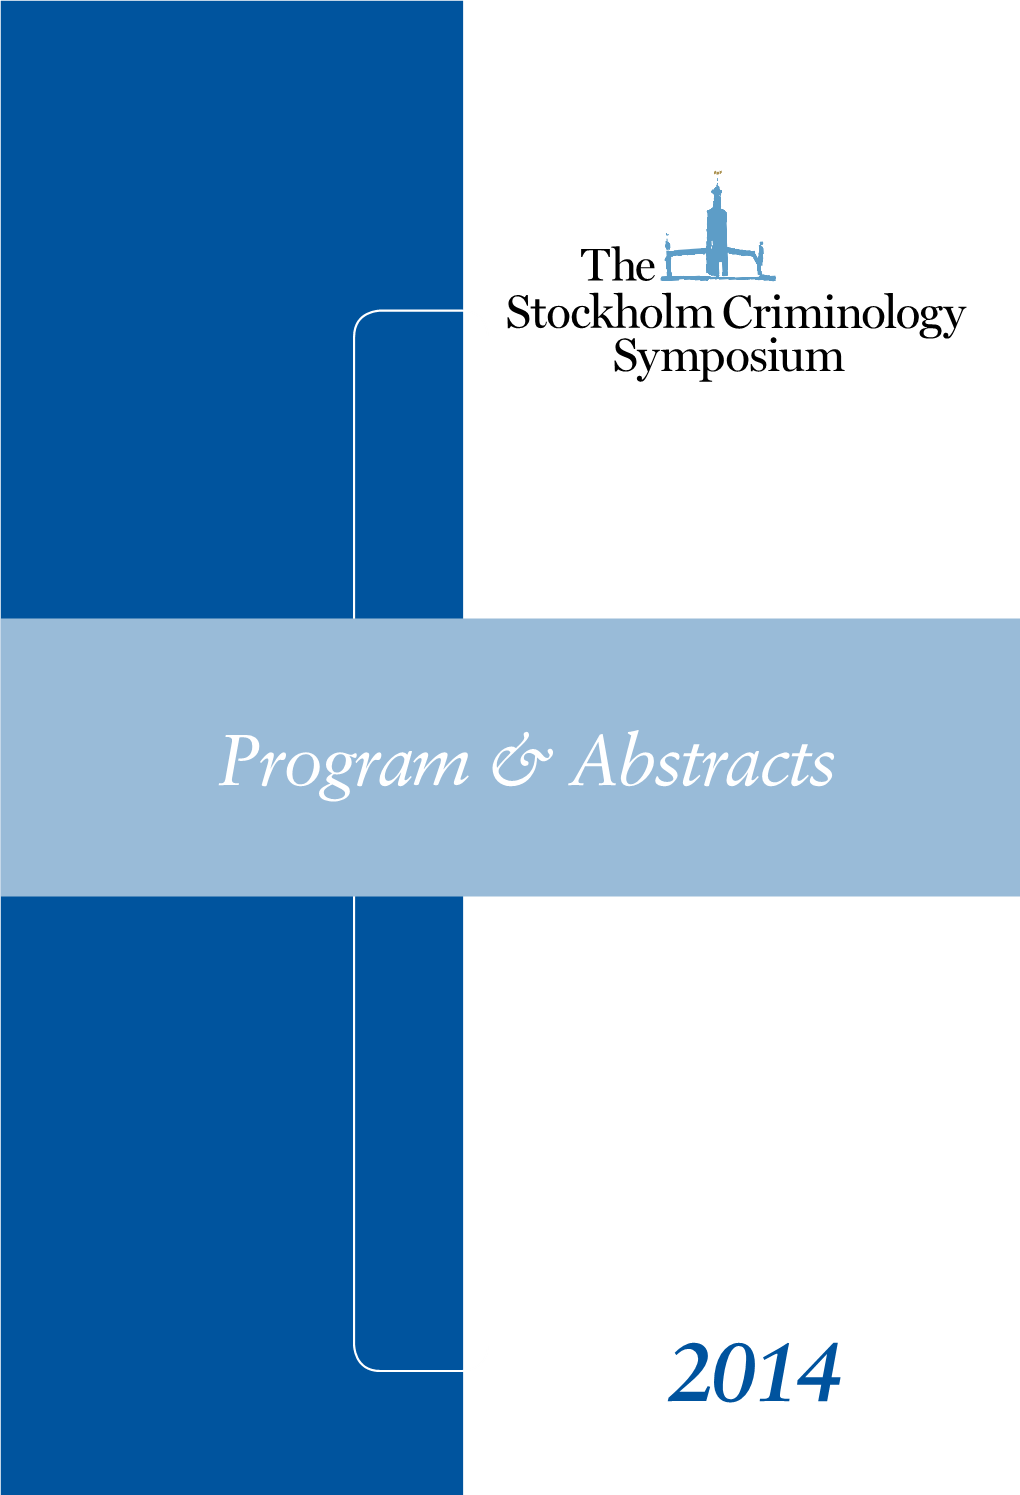 Program & Abstracts